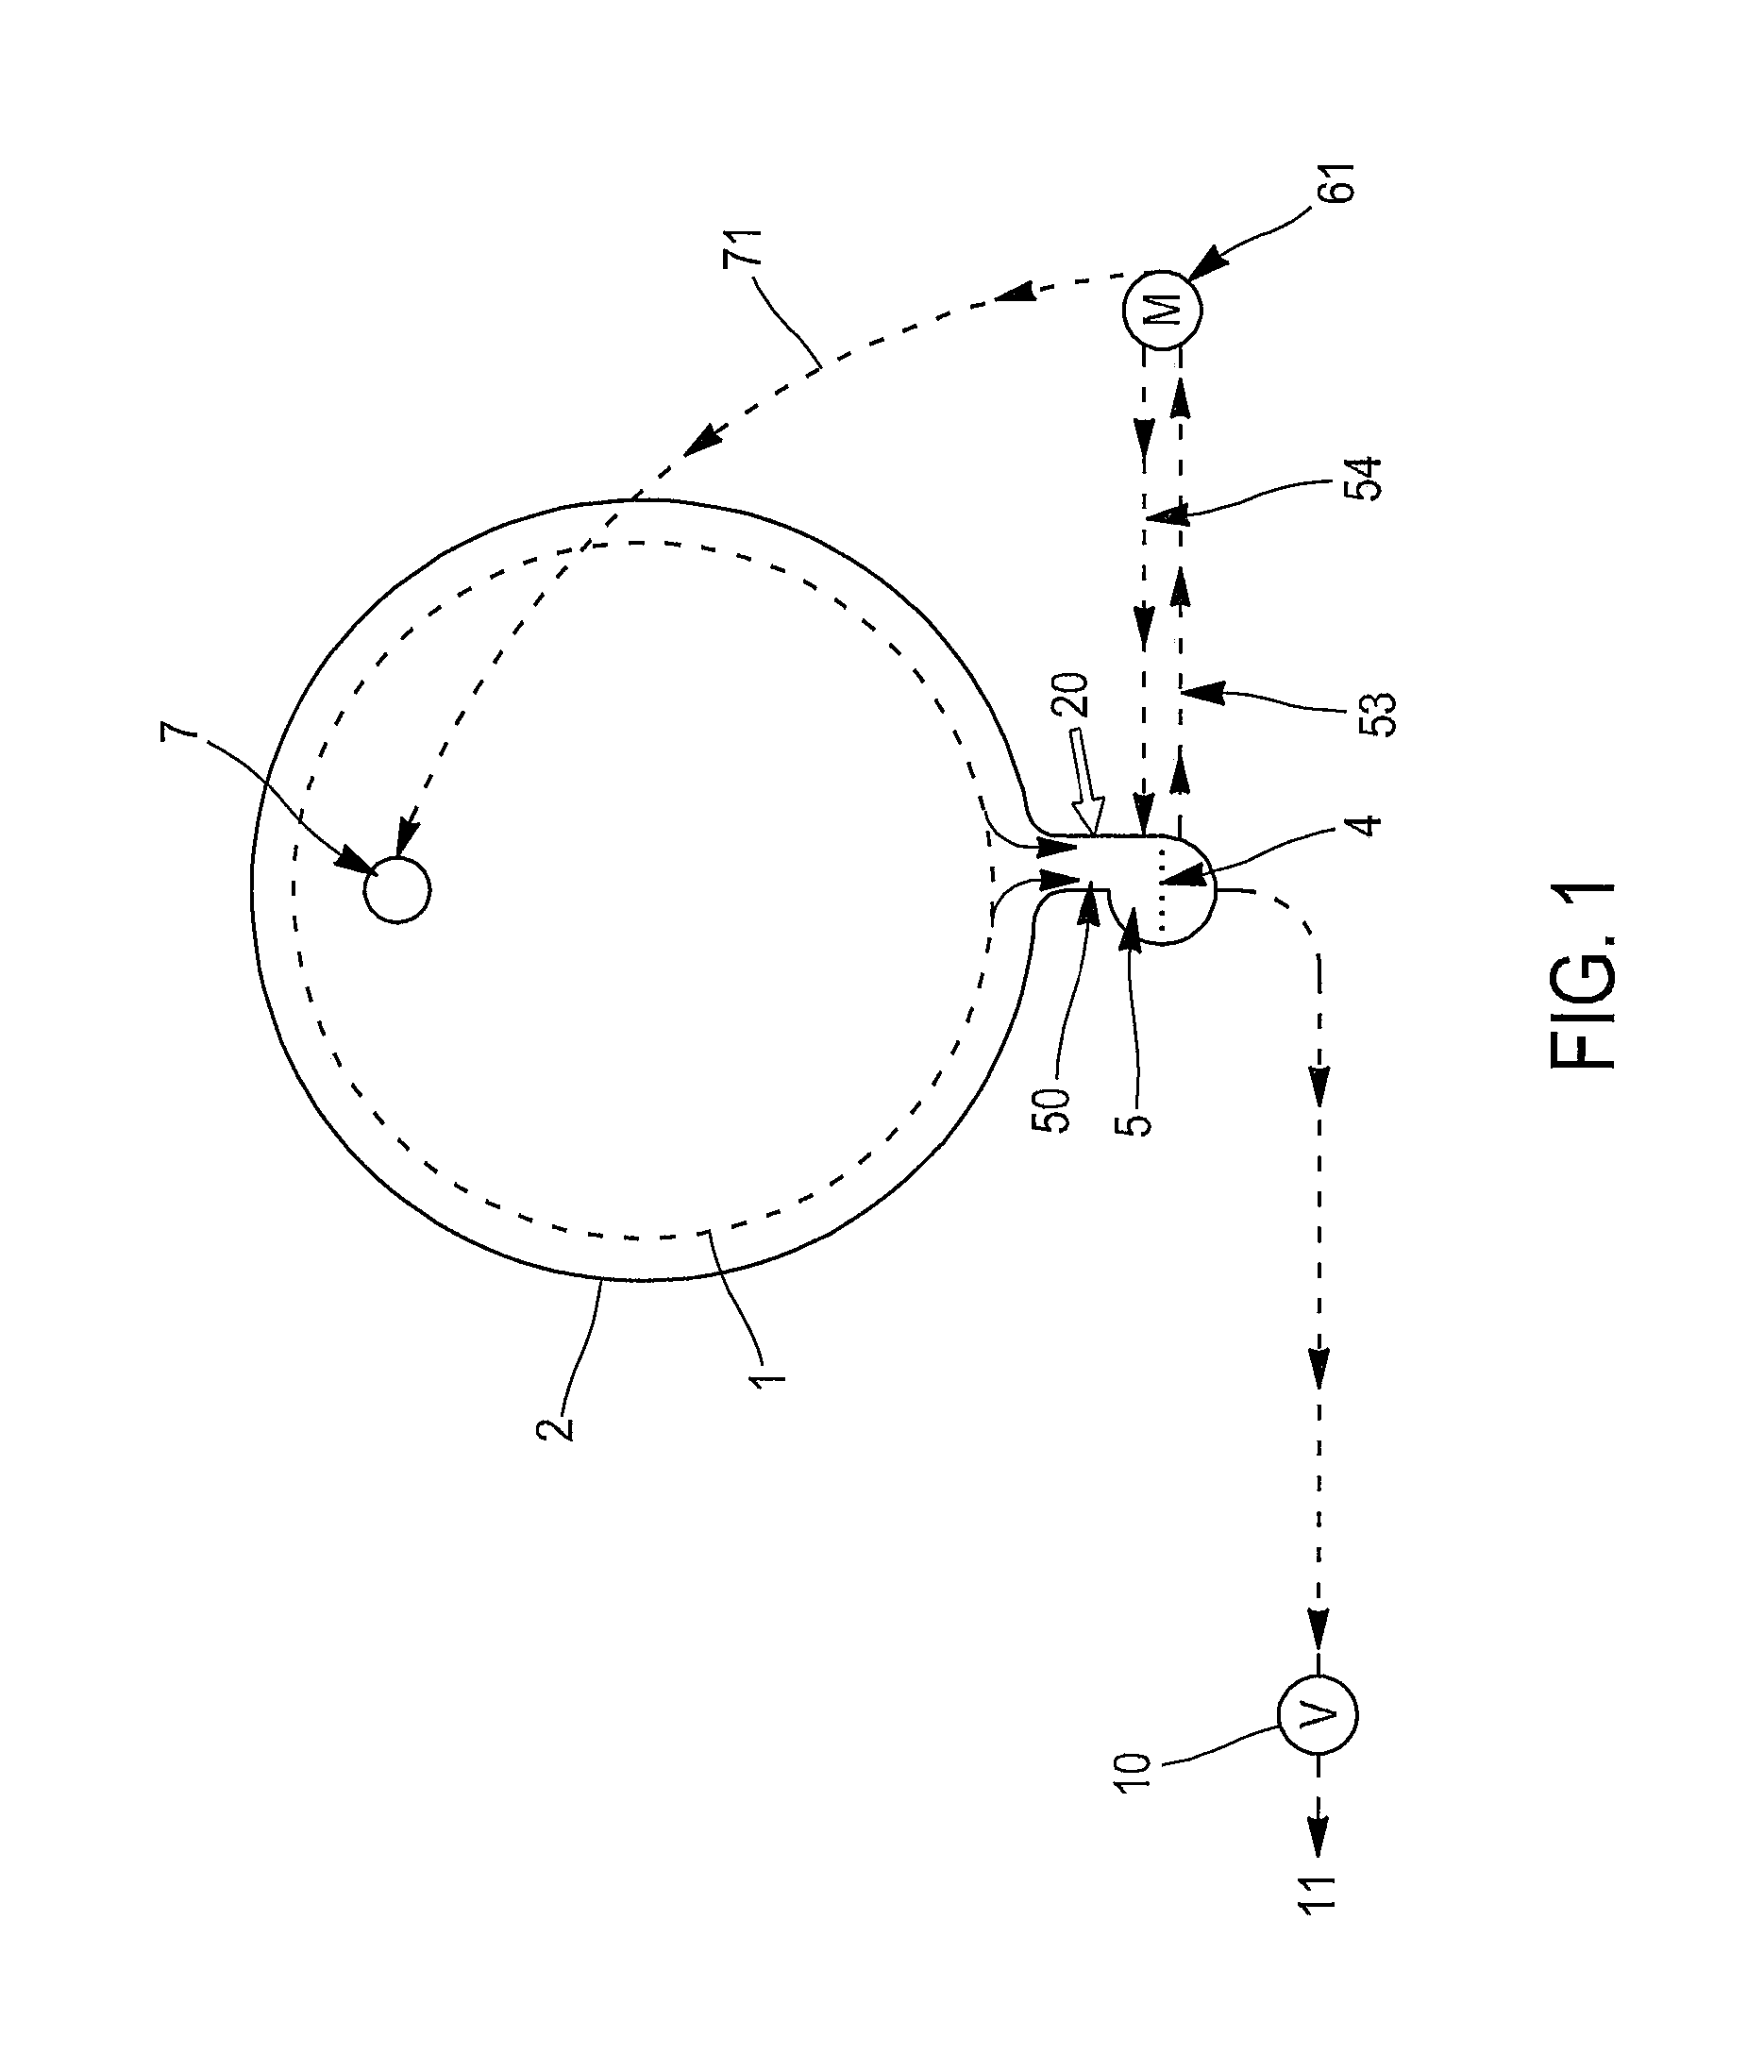 Method and Apparatus for Cleaning Delicate Textiles